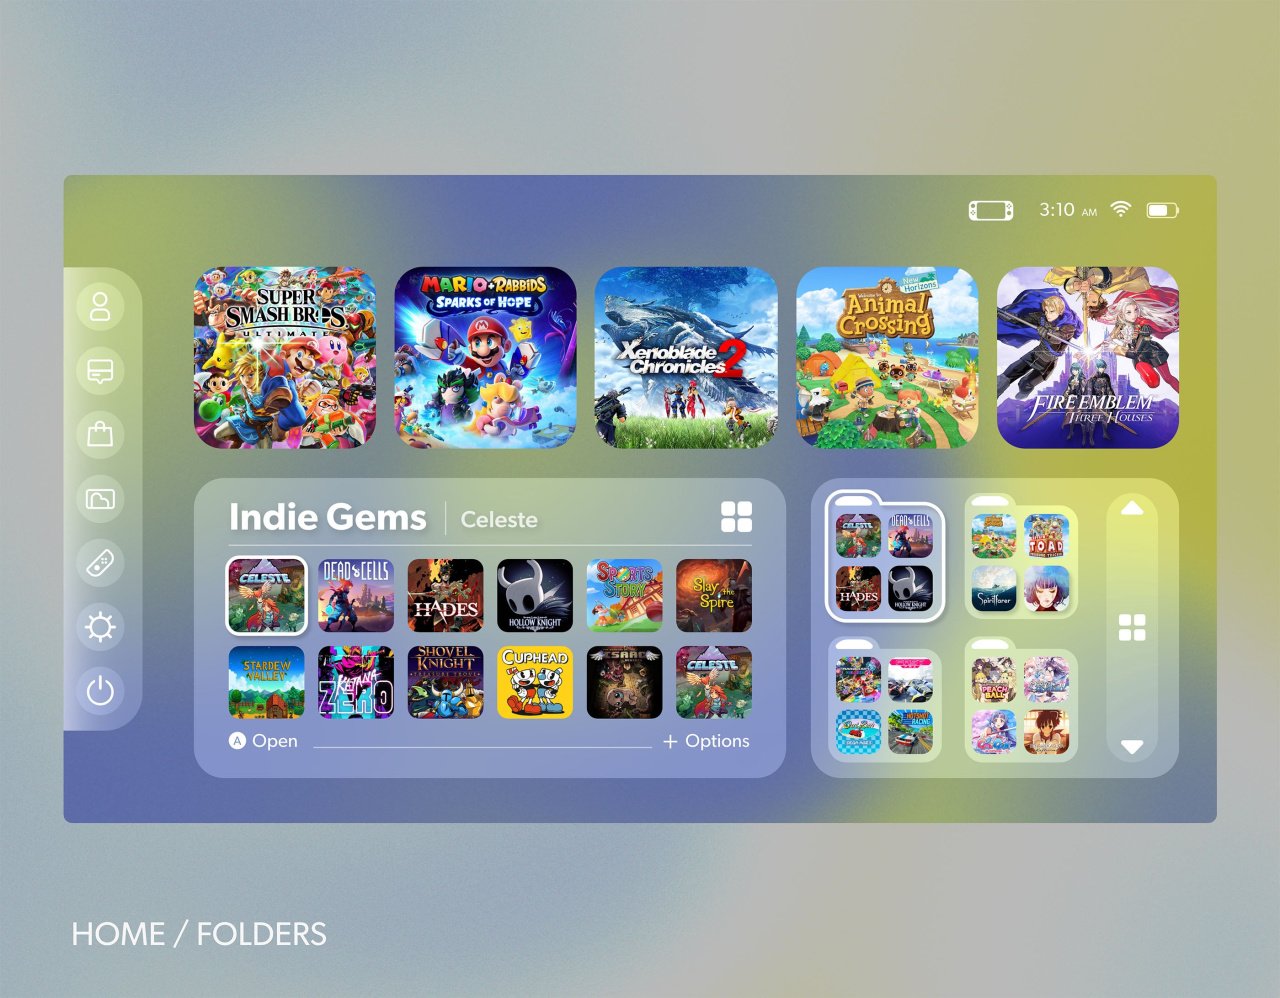 Nintendo Switch Home Menu Recreated On Android Smartphones – NintendoSoup